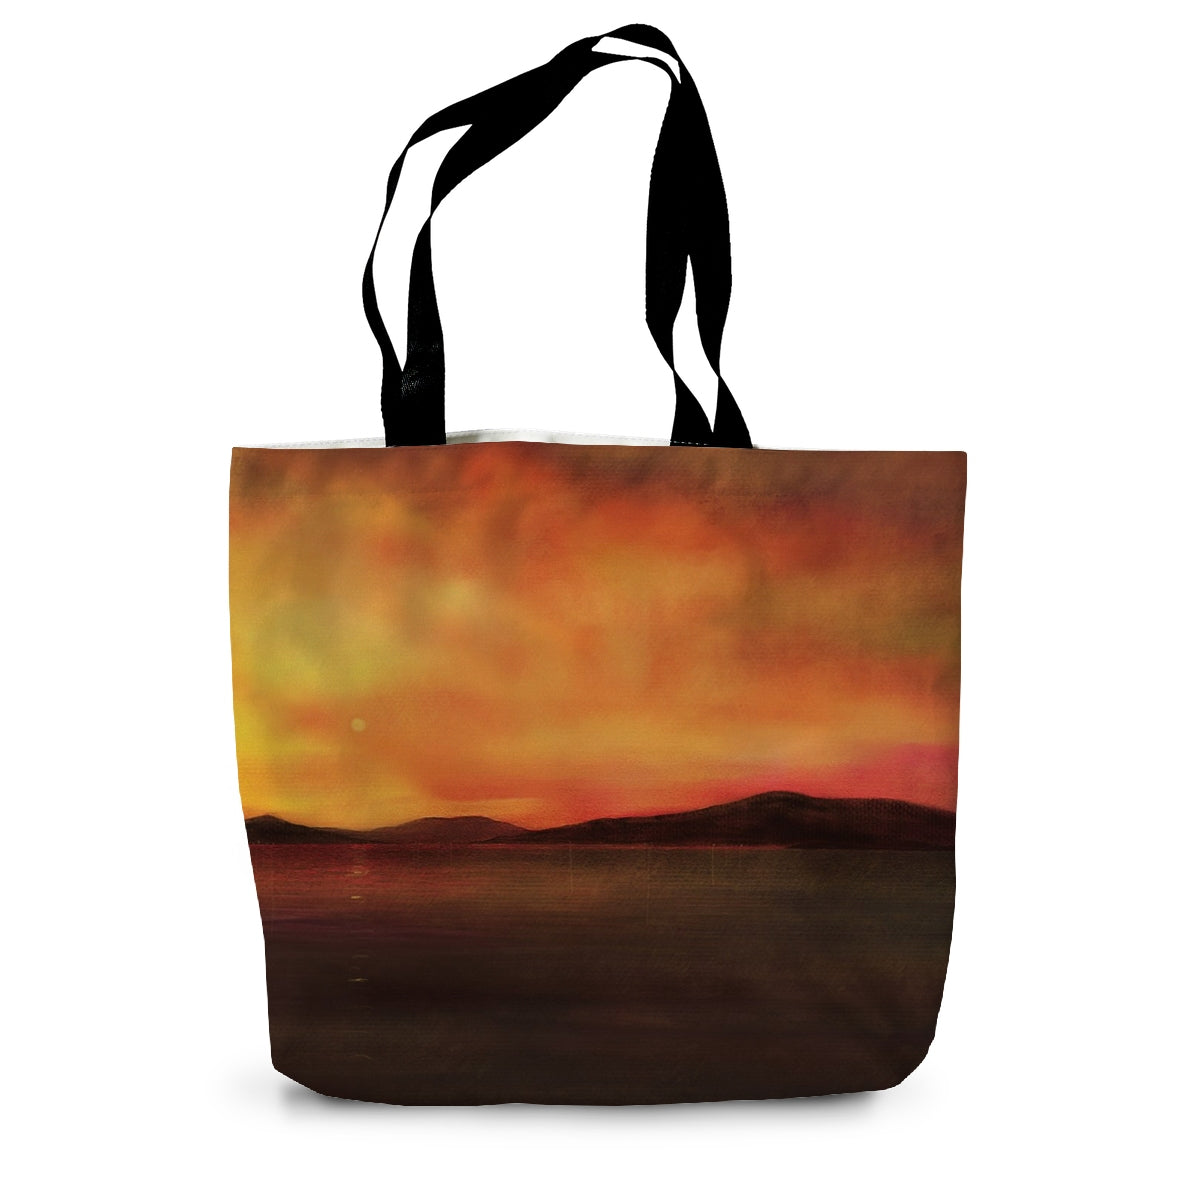 Harris Sunset Art Gifts Canvas Tote Bag-Bags-Hebridean Islands Art Gallery-14"x18.5"-Paintings, Prints, Homeware, Art Gifts From Scotland By Scottish Artist Kevin Hunter